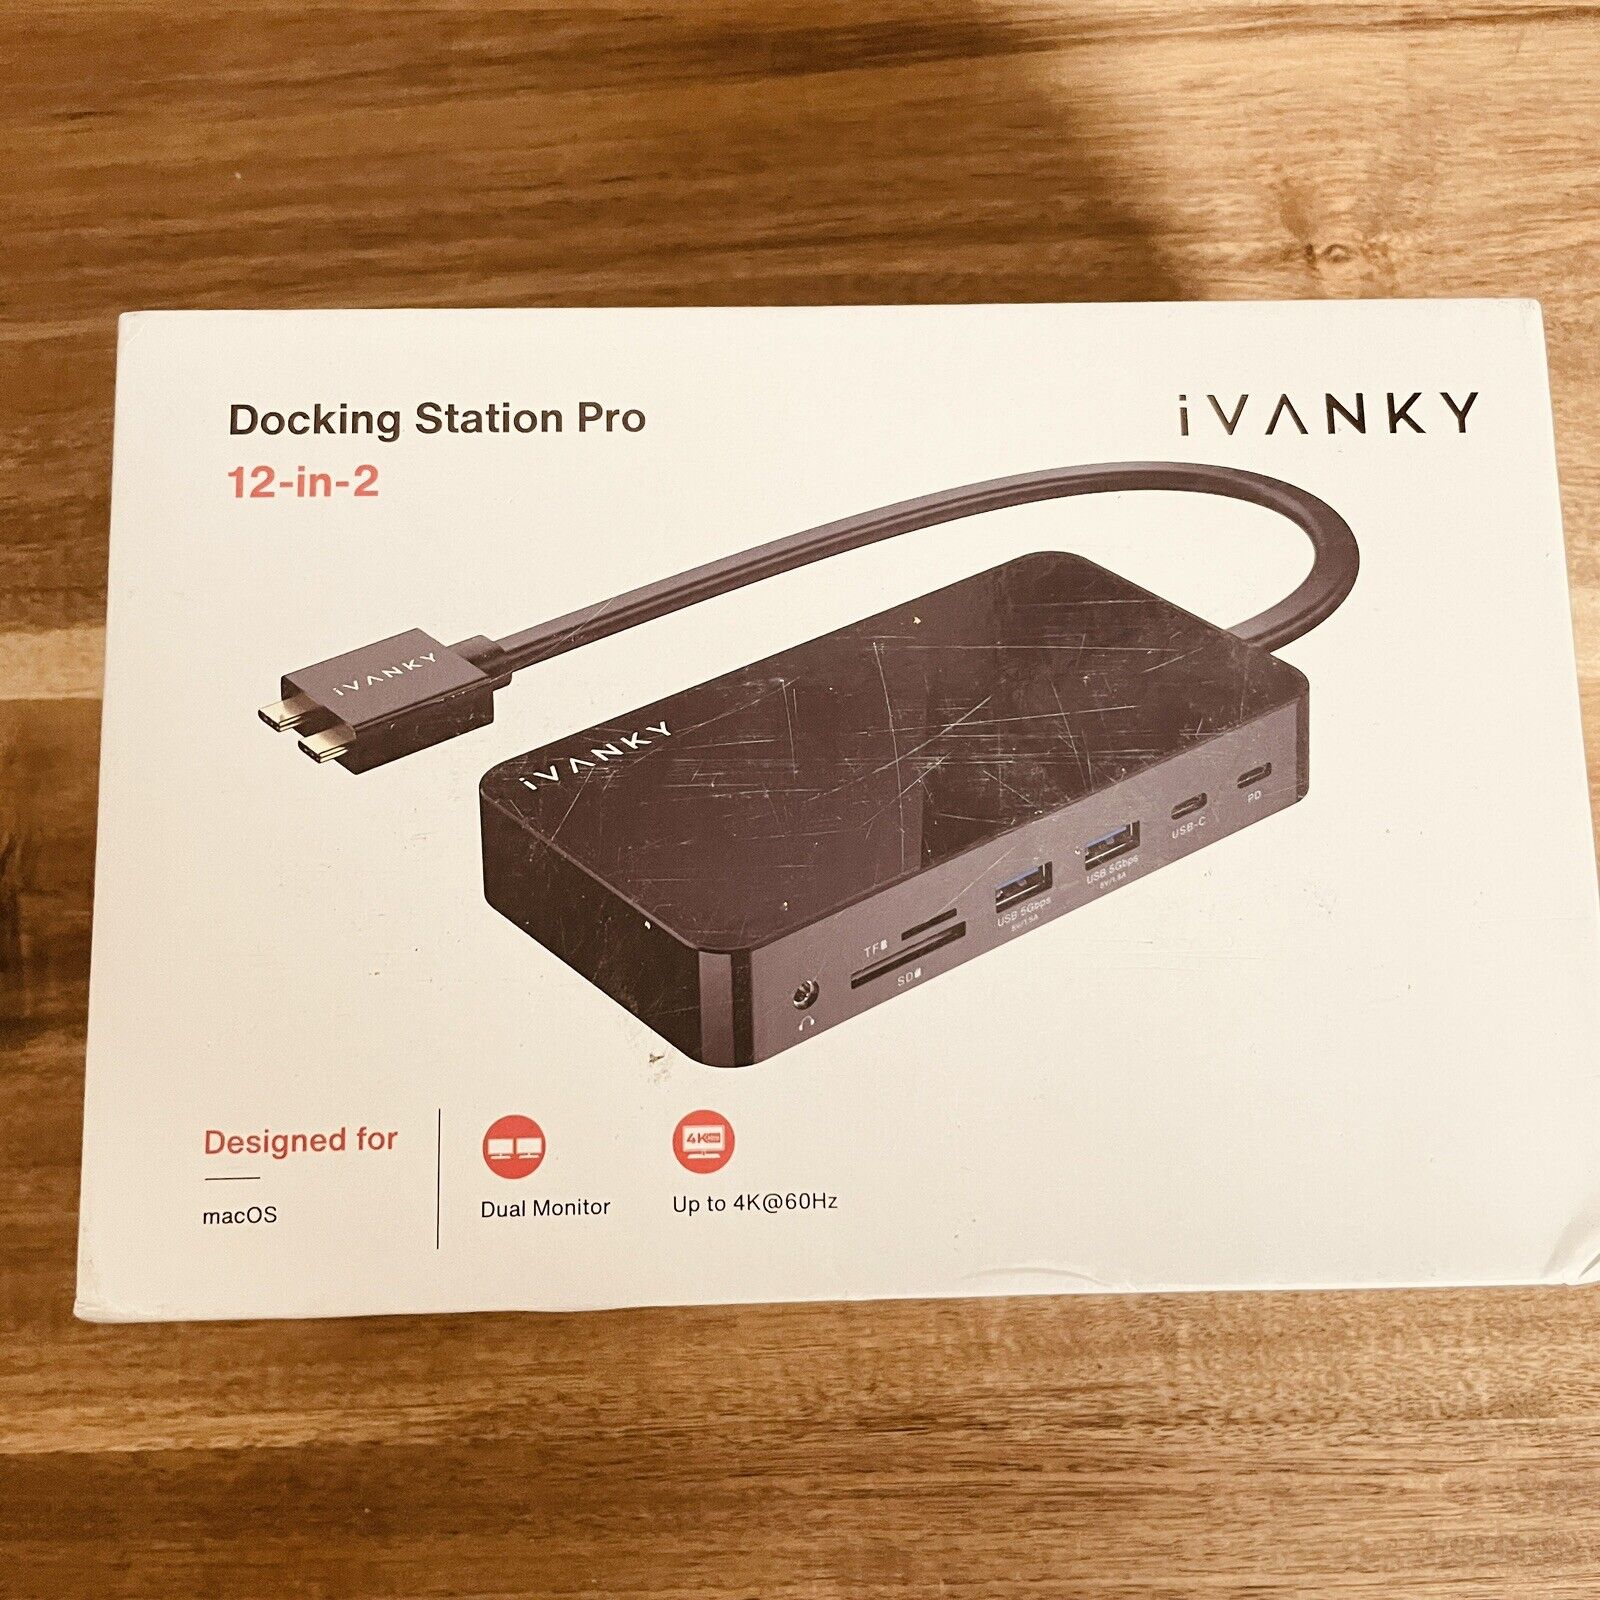 iVANKY FusionDock 1 MacBook Docking Station Pro 12 In 2, with 180W Power Adapter